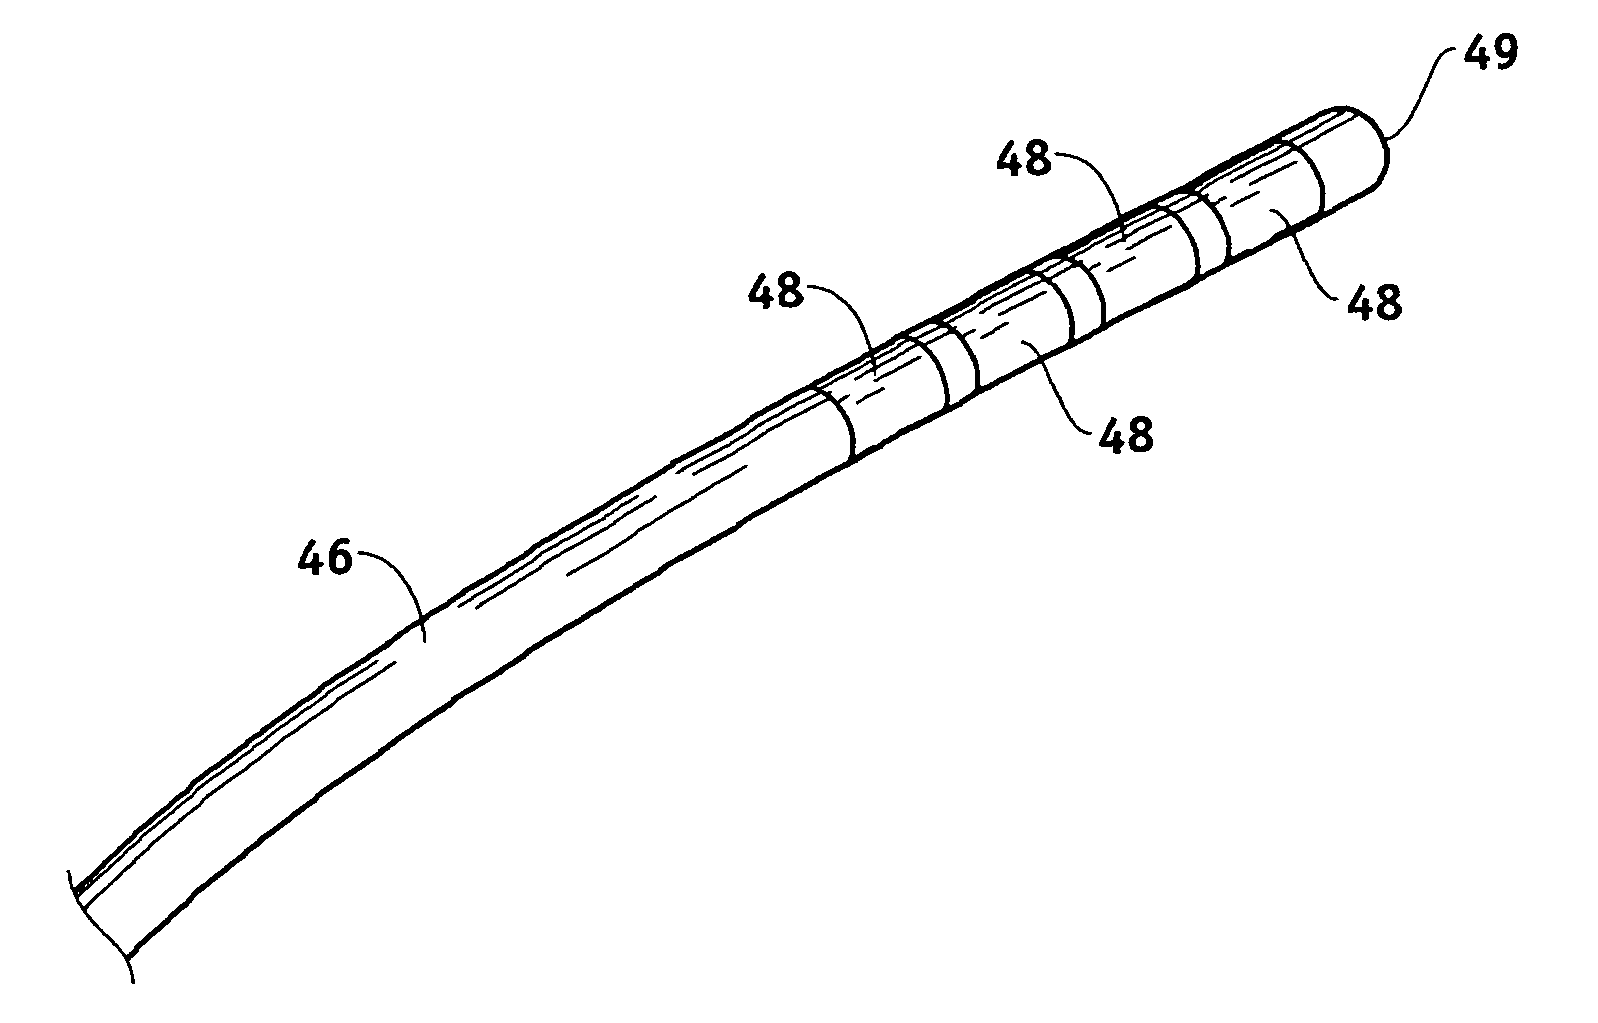 Lead electrode for use in an MRI-safe implantable medical device